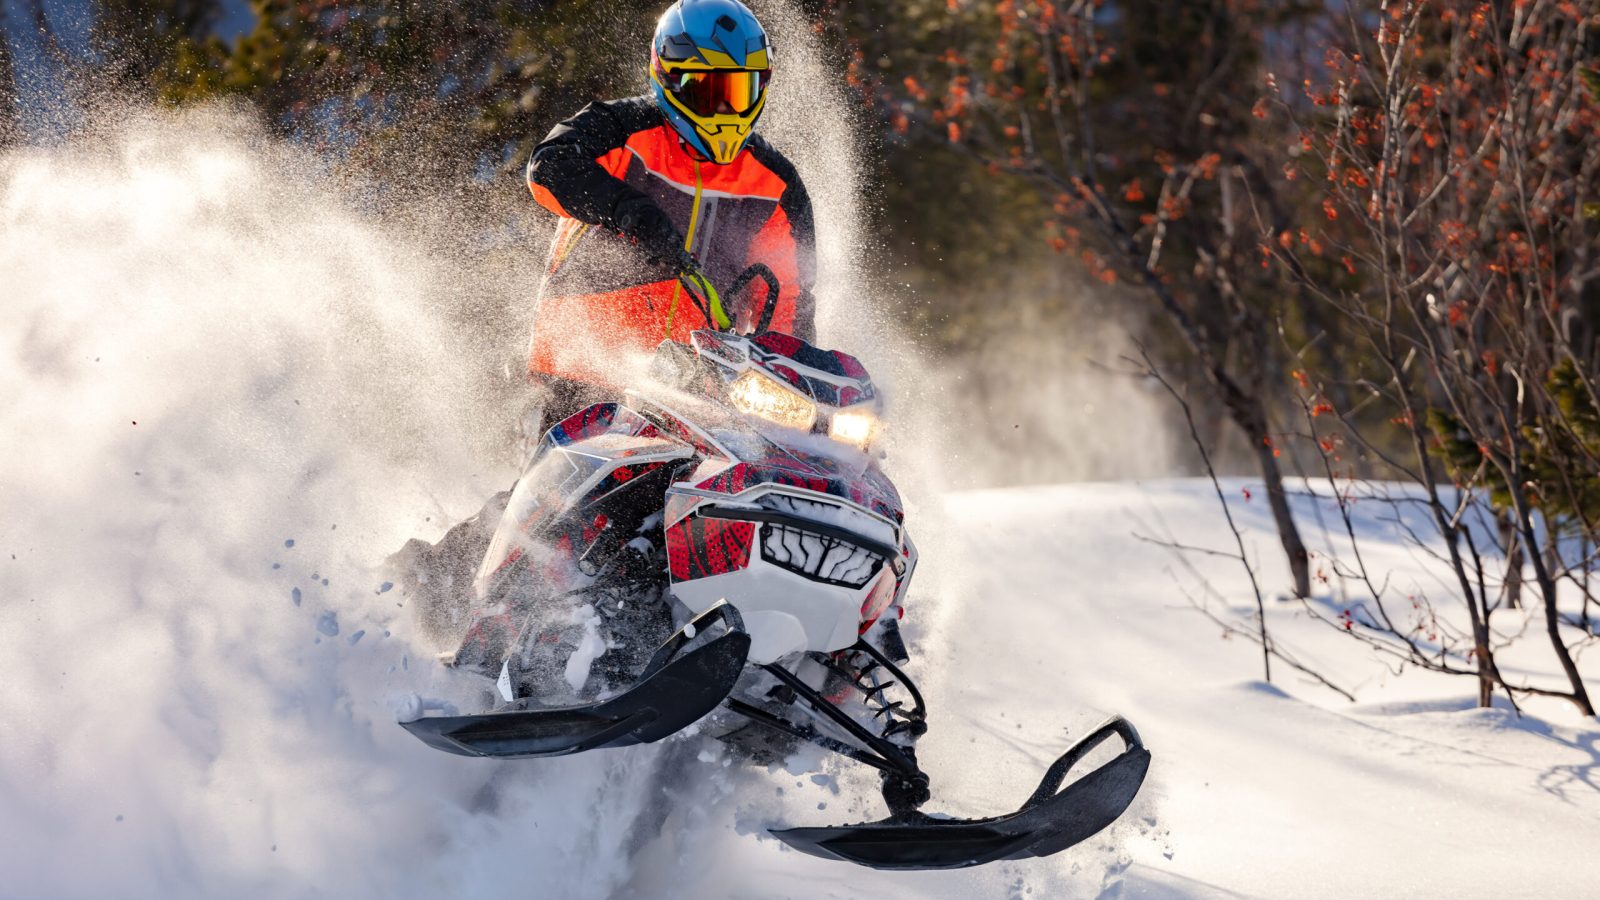 An exhilarating shot of a man enjoying the thrill of snowmobiling, dashing through the snowy landscape.